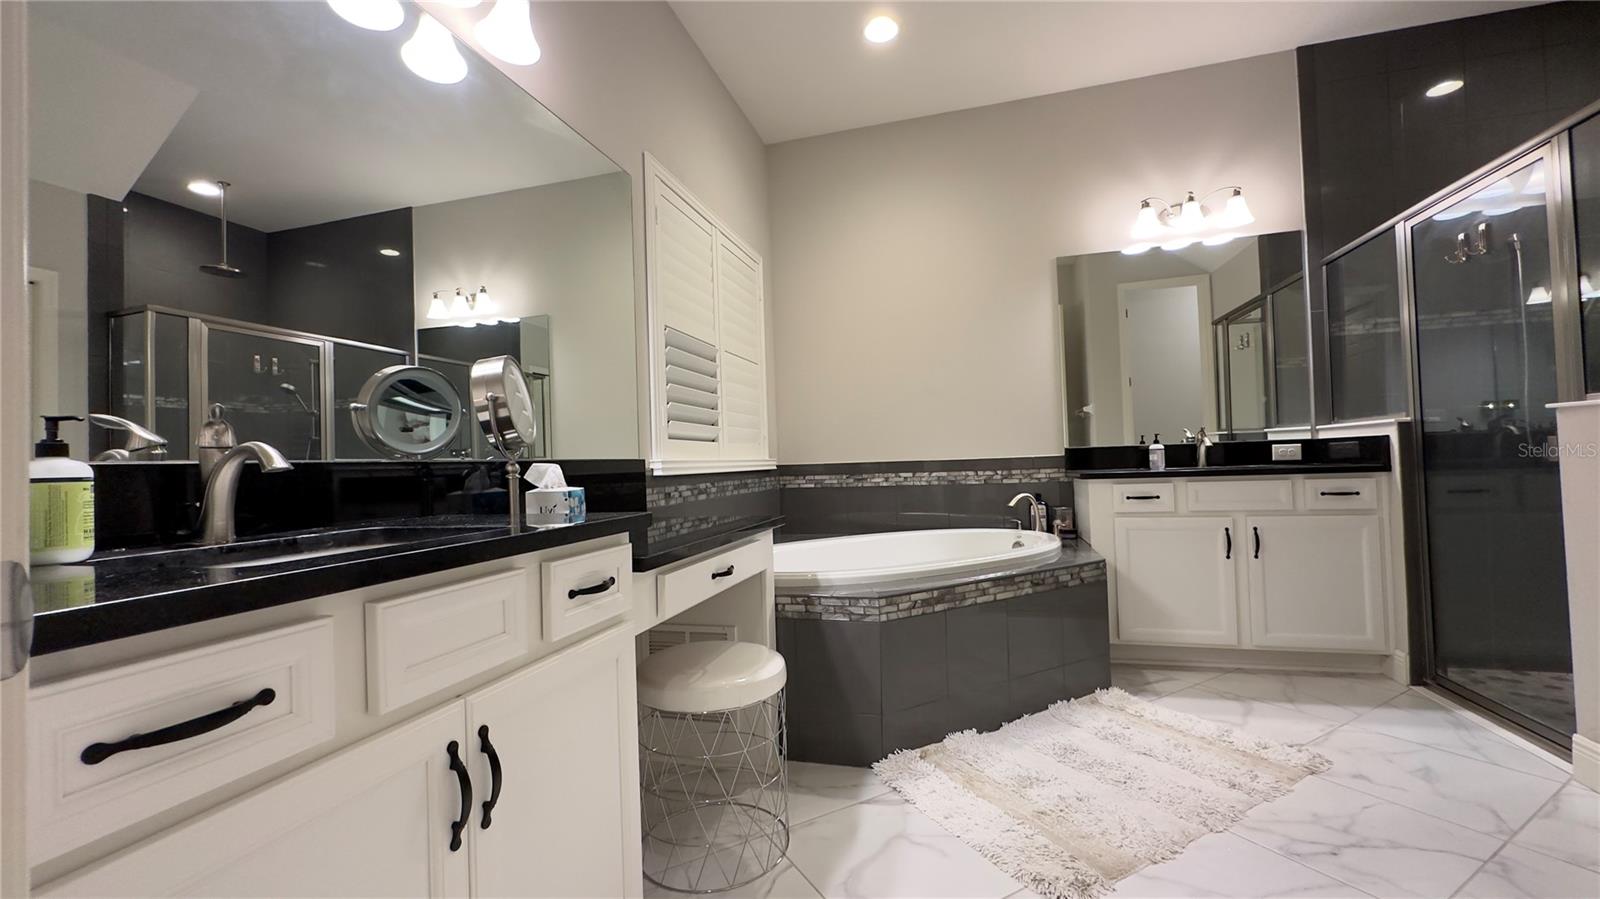 The luxurious Master bathroom is a heavenly refuge with its glamorous yet inviting black and whiteaesthetics. Granite counter tops, elegant light fixtures and brushed nickel faucets enhance the appeal ofthe garden tub, walk-in shower and double sink with vanity